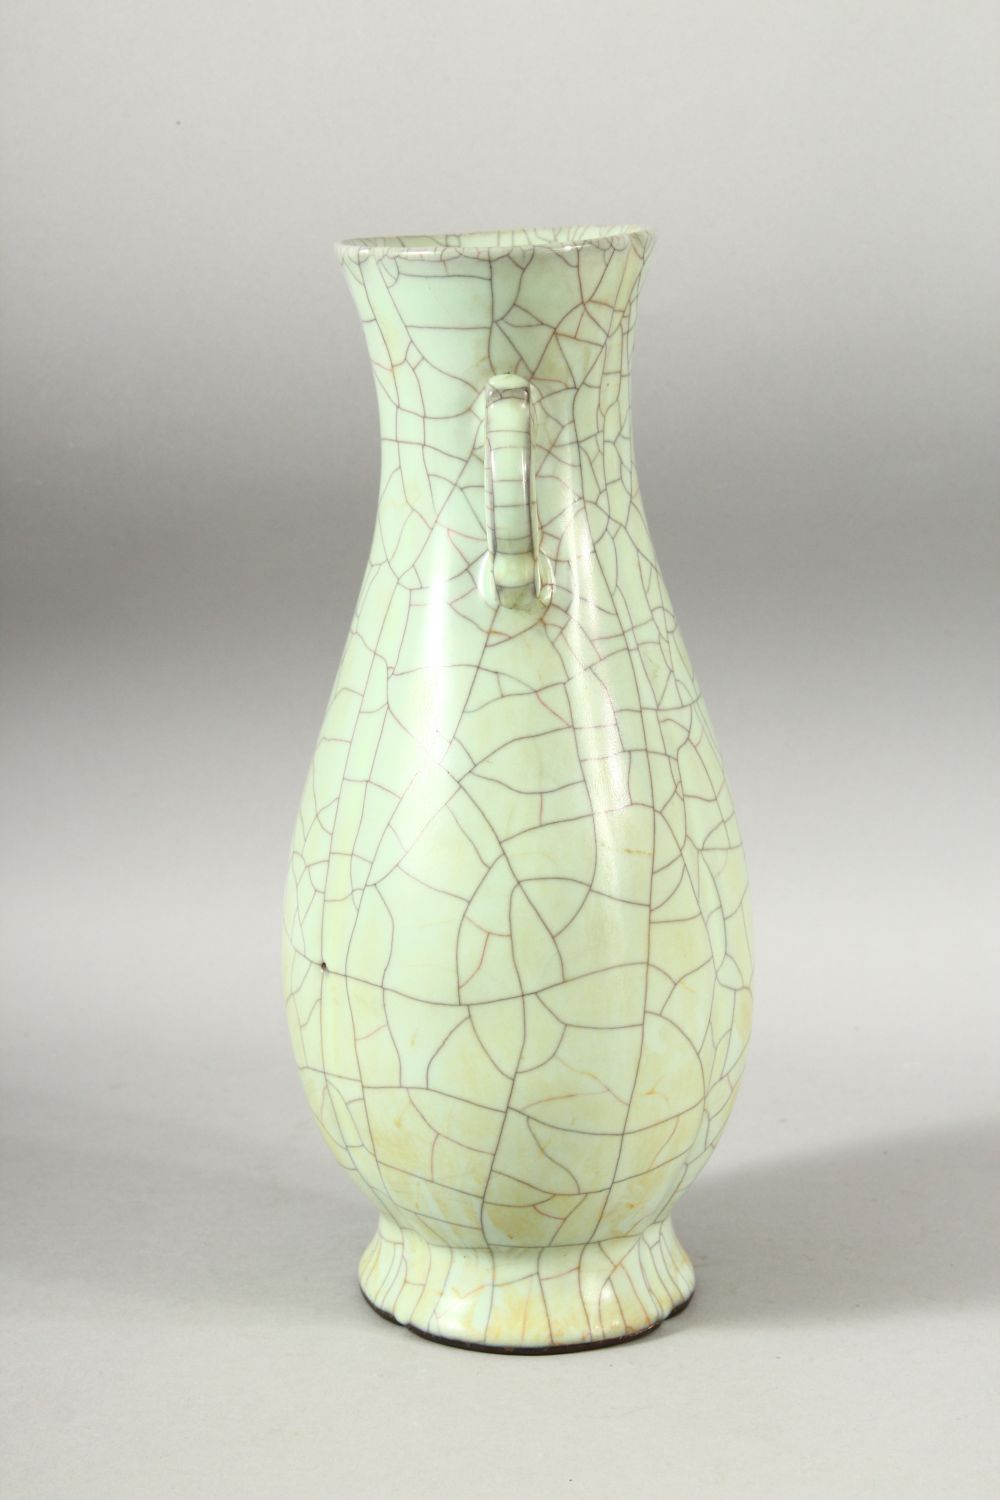 A CHINESE CELADON CRACKLE GLAZE TWIN HANDLE VASE, 28.5cm high. - Image 2 of 6